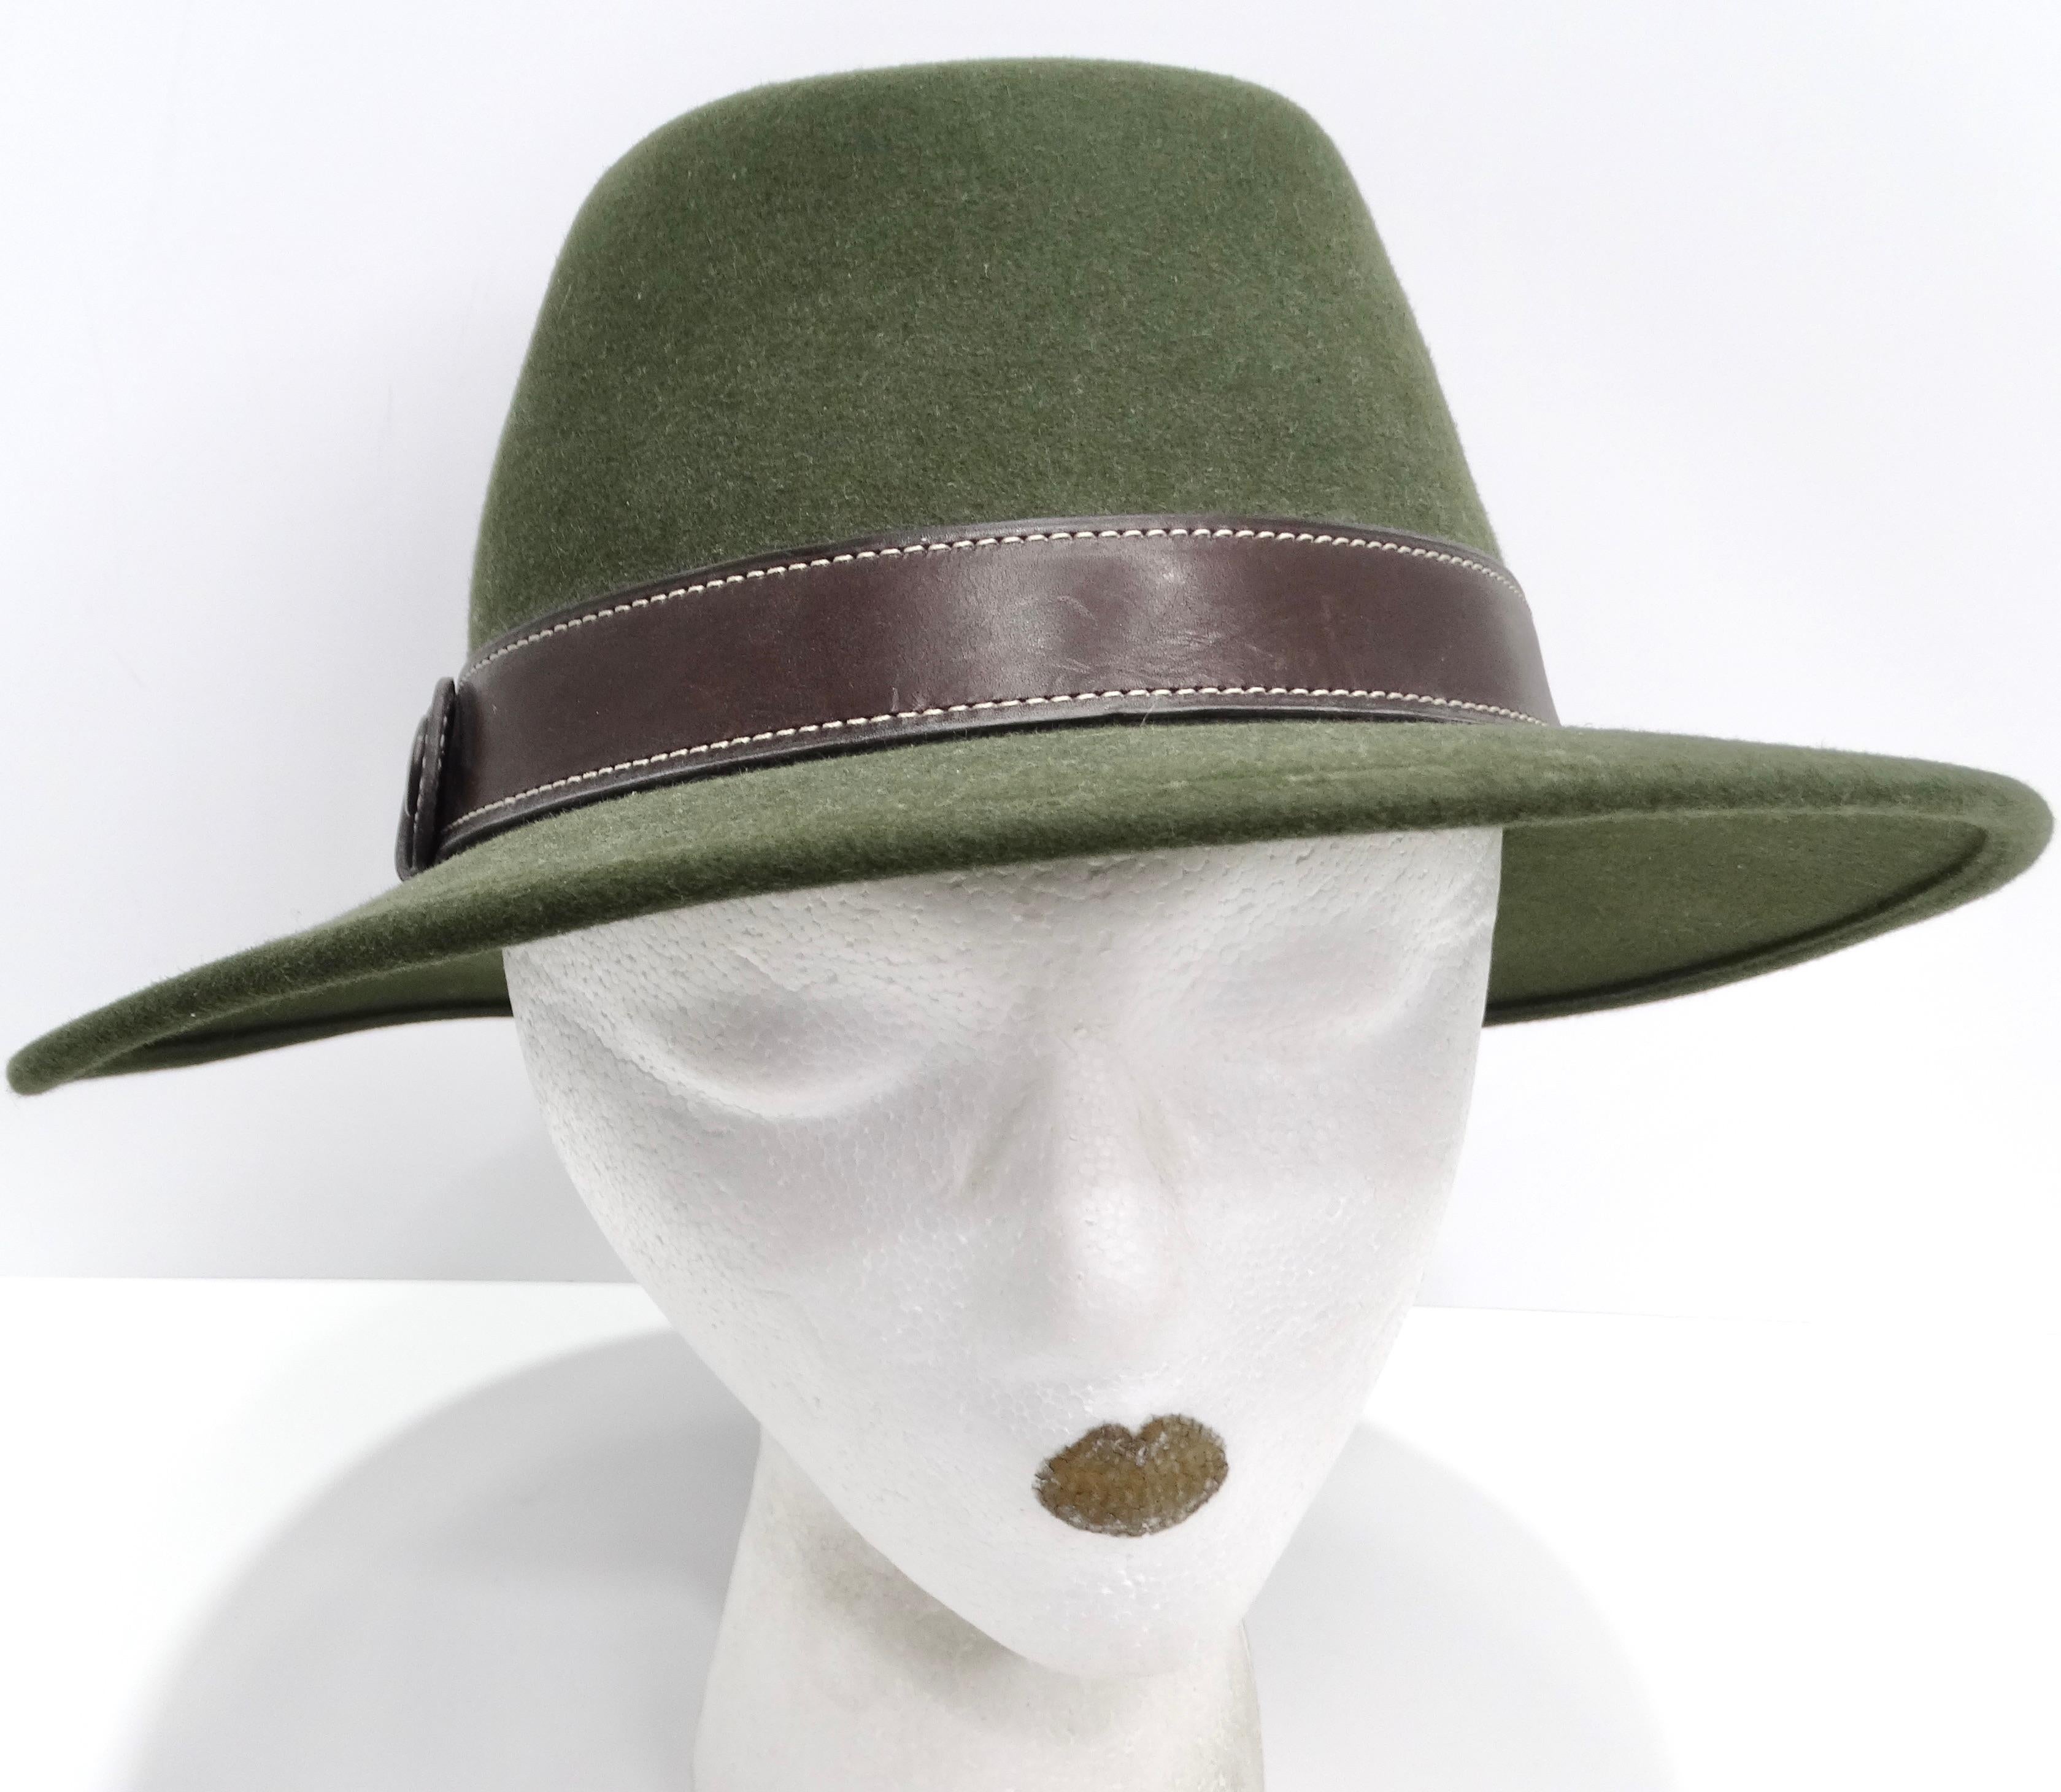 Introducing the timeless elegance of the Hermes 1980s Green Wide Brim Hat, a classic and sophisticated accessory that exudes timeless style. Crafted from luxurious green wool, this wide-brim fedora hat features a sleek and chic design that is both